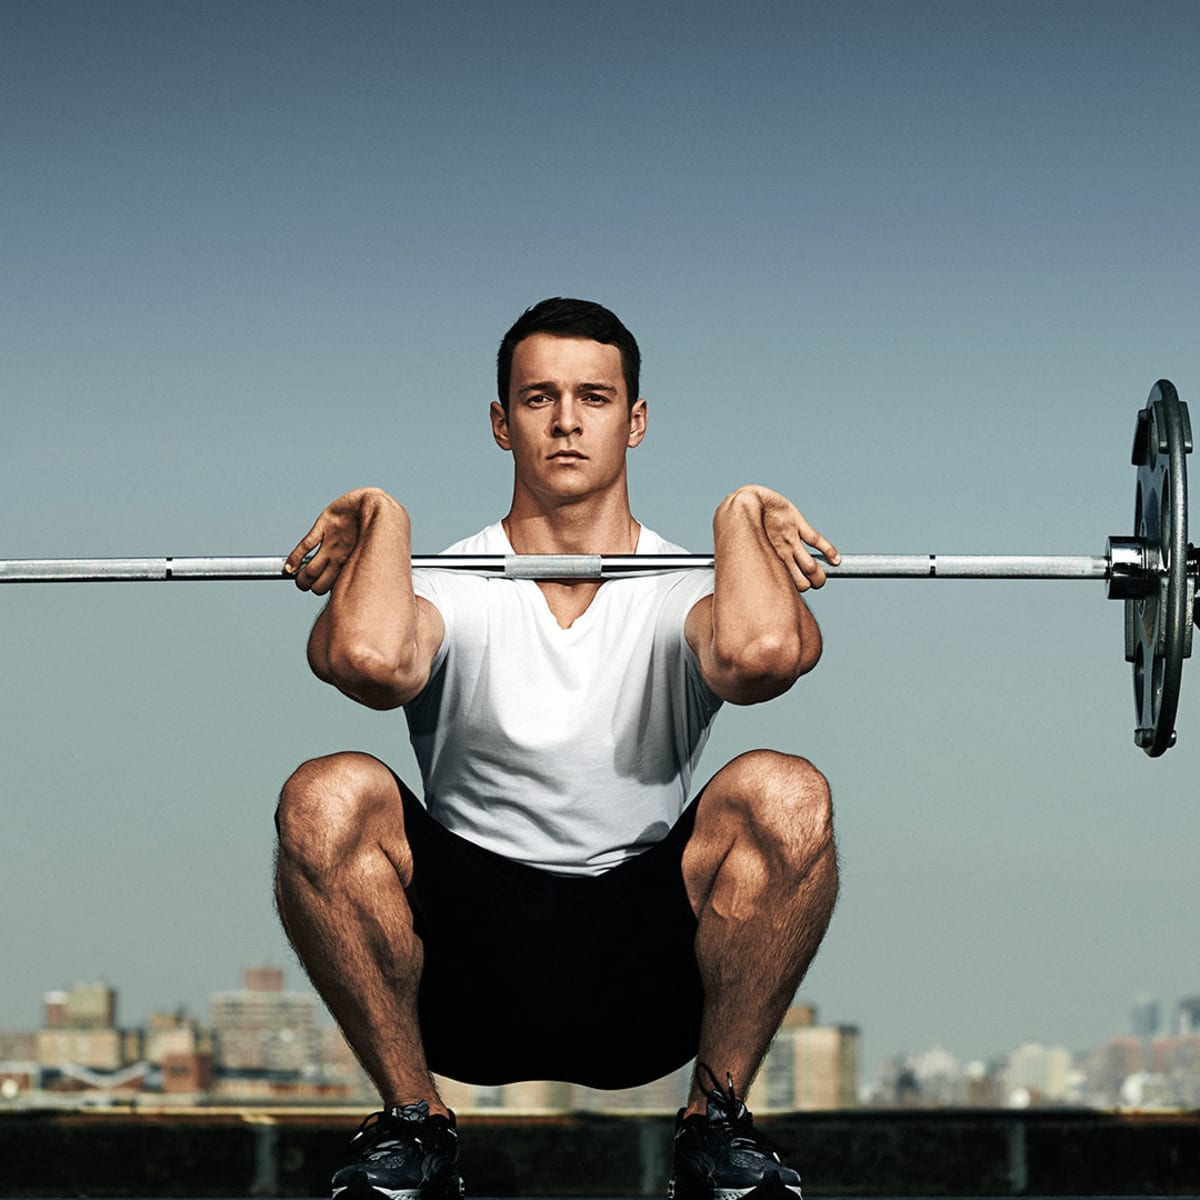 Best Metabolic Conditioning Workout for a Total-Body Burn